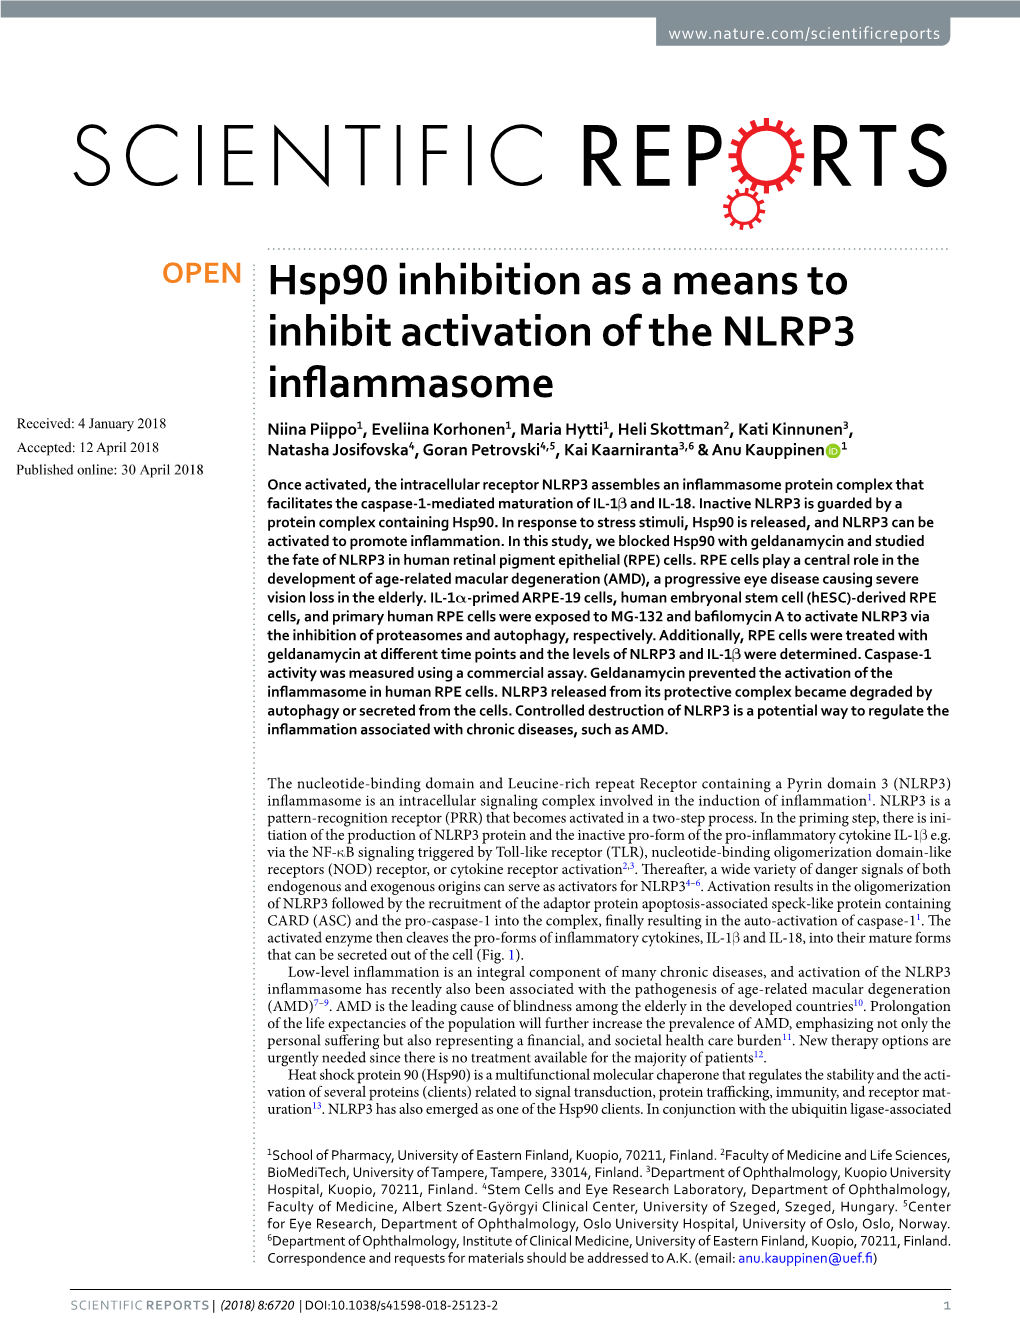 Hsp90 Inhibition As a Means to Inhibit Activation of the NLRP3